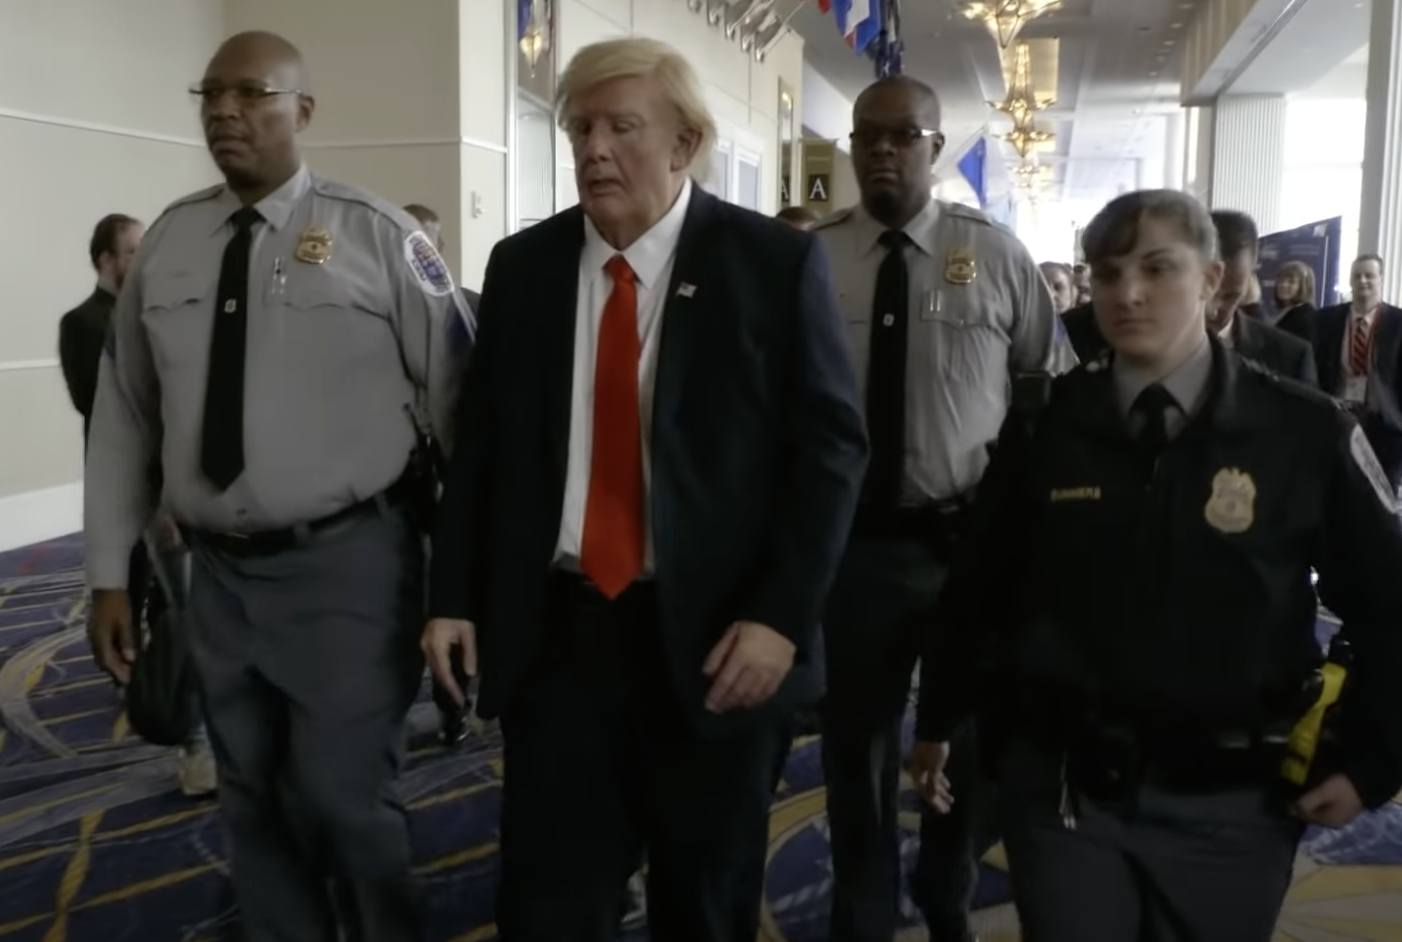 sacha baron cohen in disguise as donald trump getting escorted by police